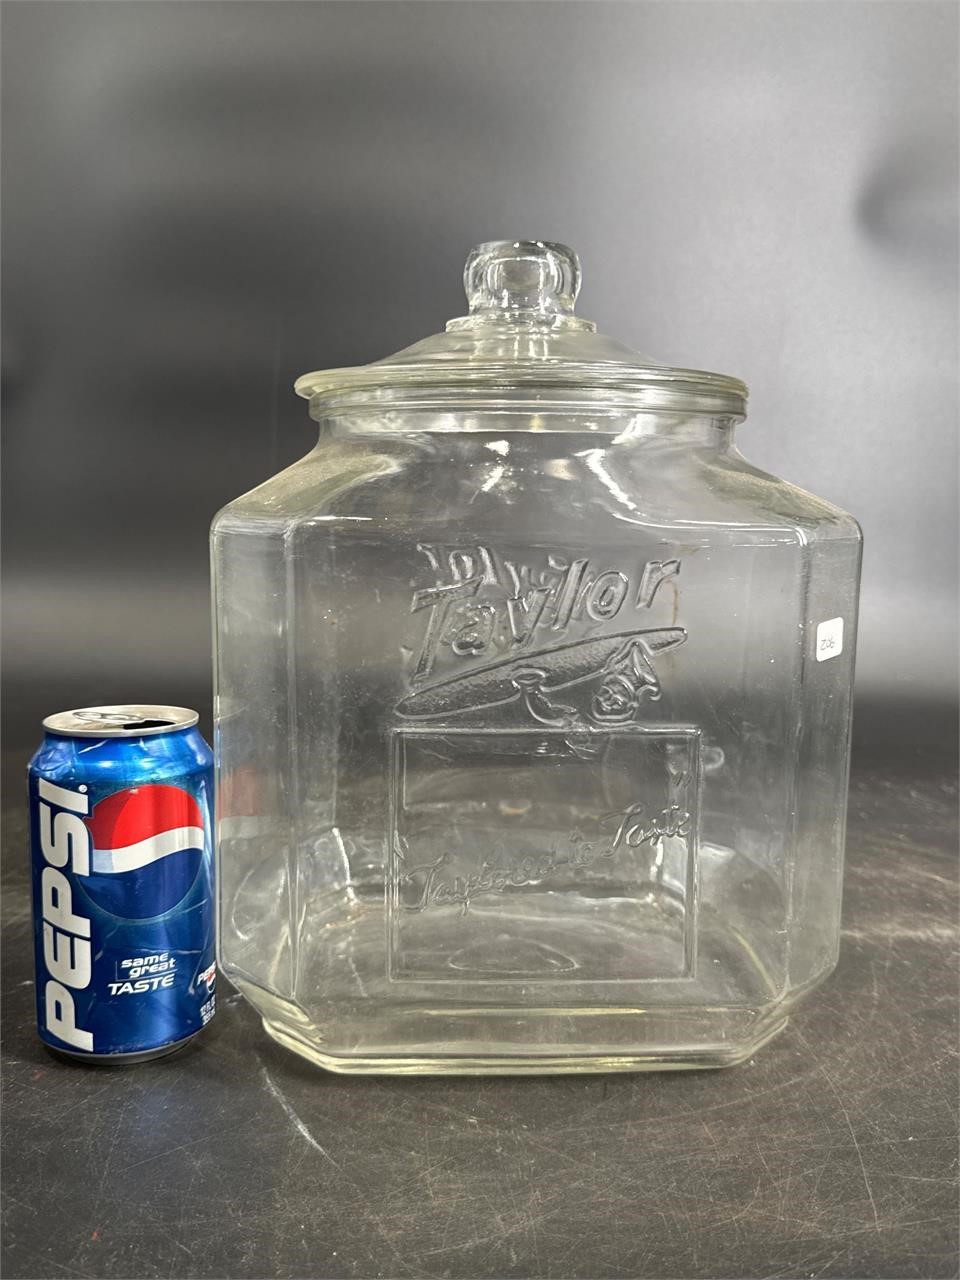 TAYLOR BISCUIT CO. COUNTRY STORE COUNTER GLASS JAR